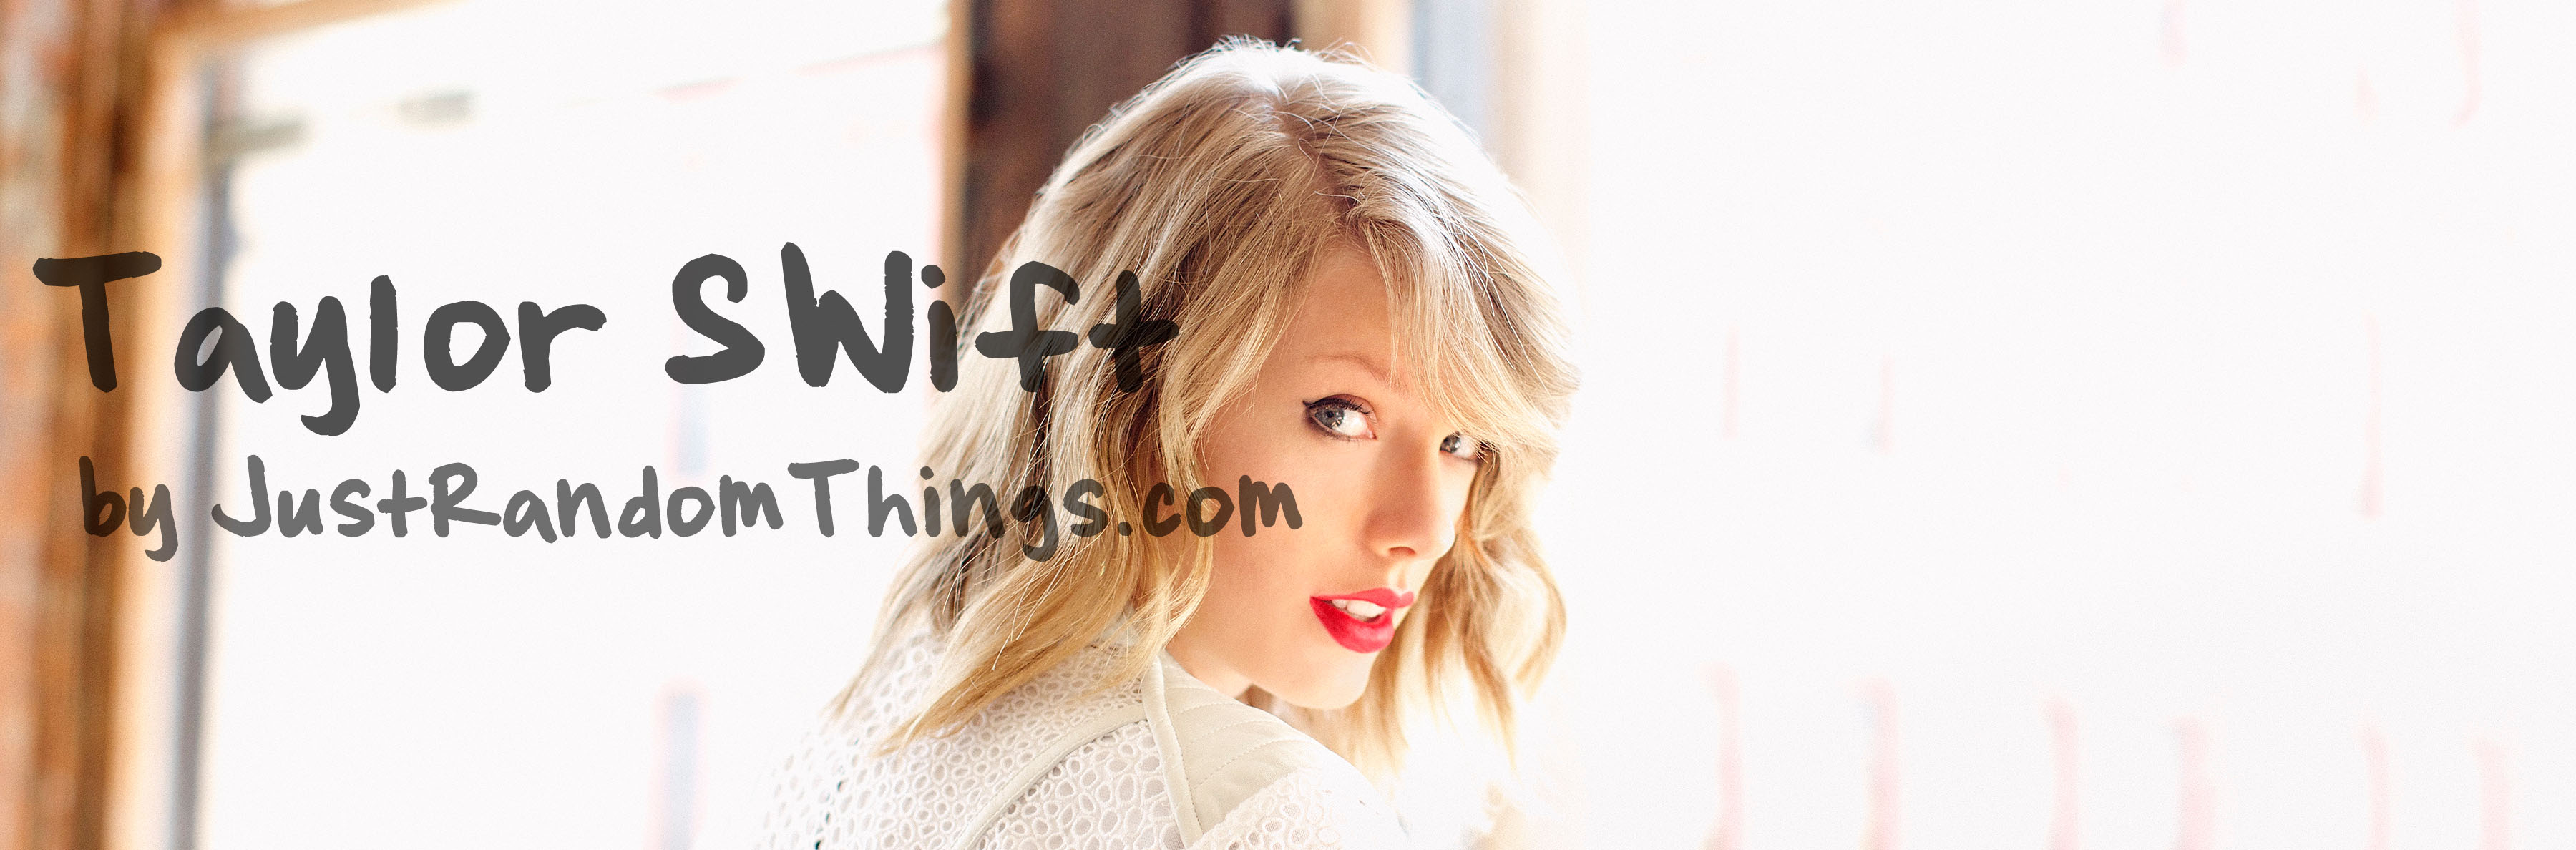 taylor swift biography, bio, news, photos, pictures, songs, albums, life, personality